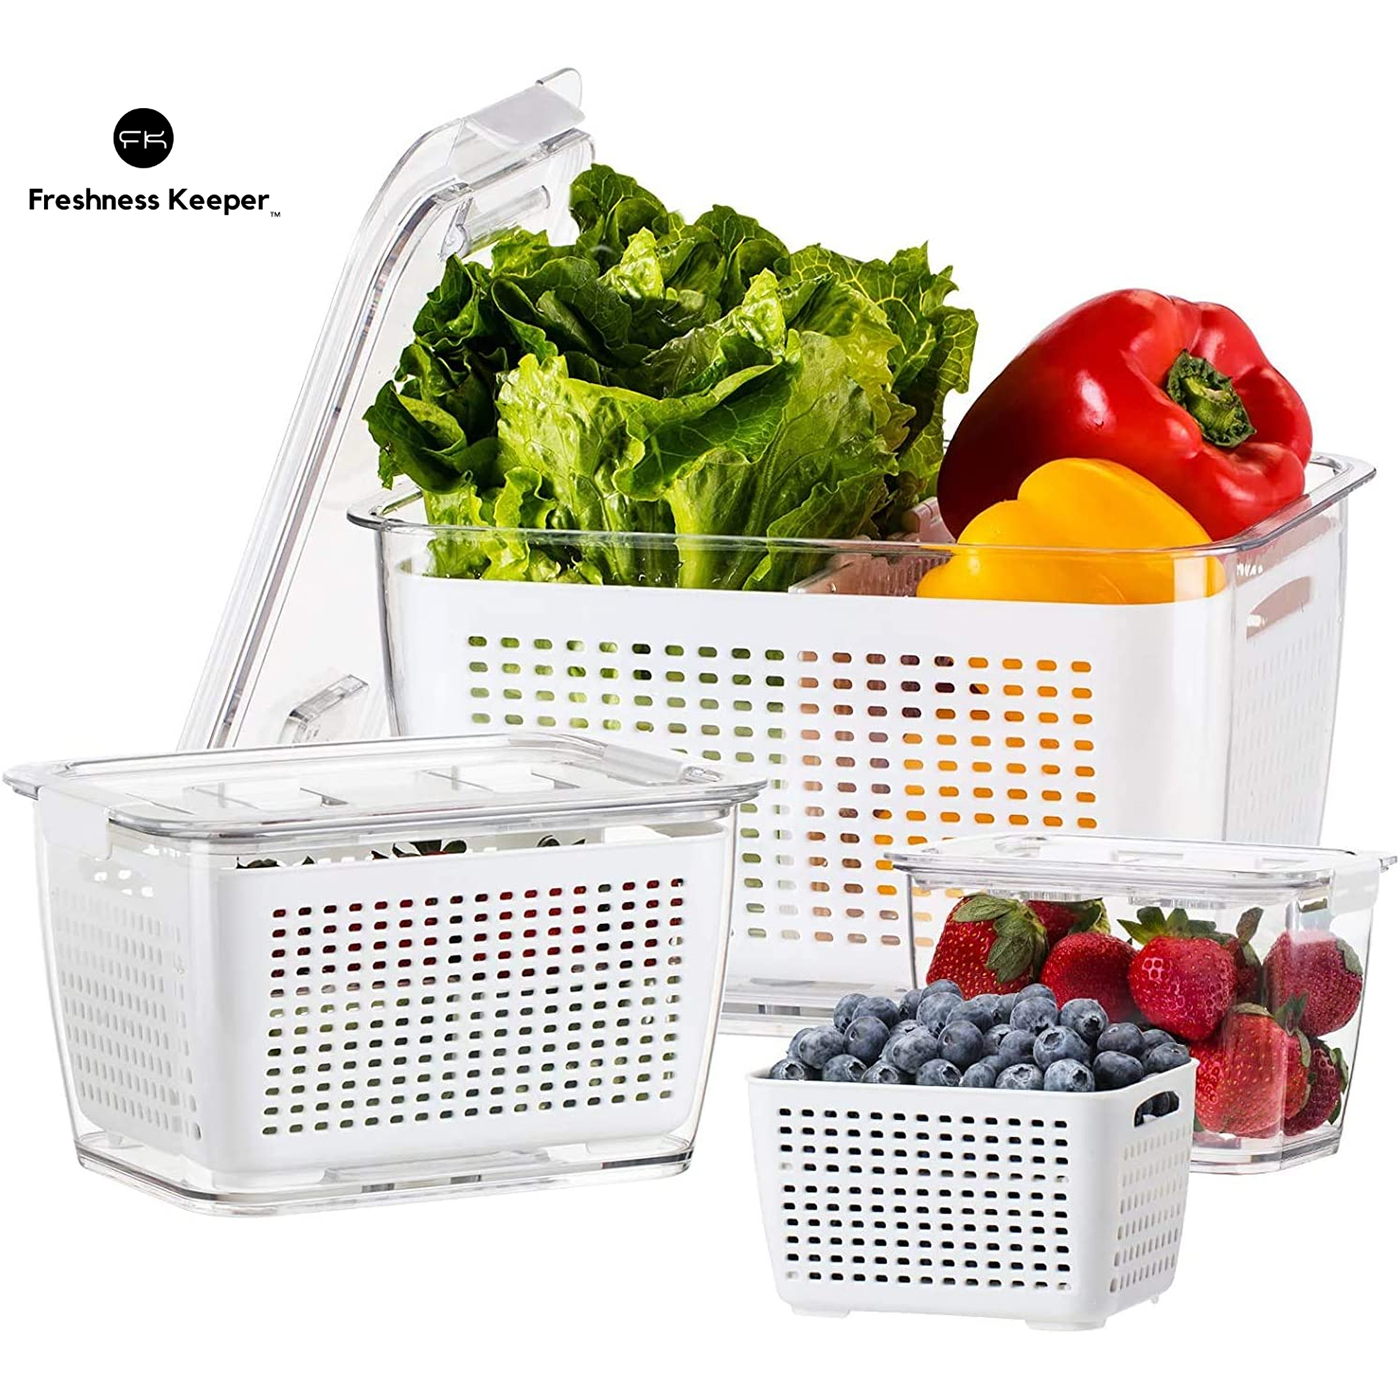 BPA Free Partitioned Produce Saver Container Fridge Organizer with Vents